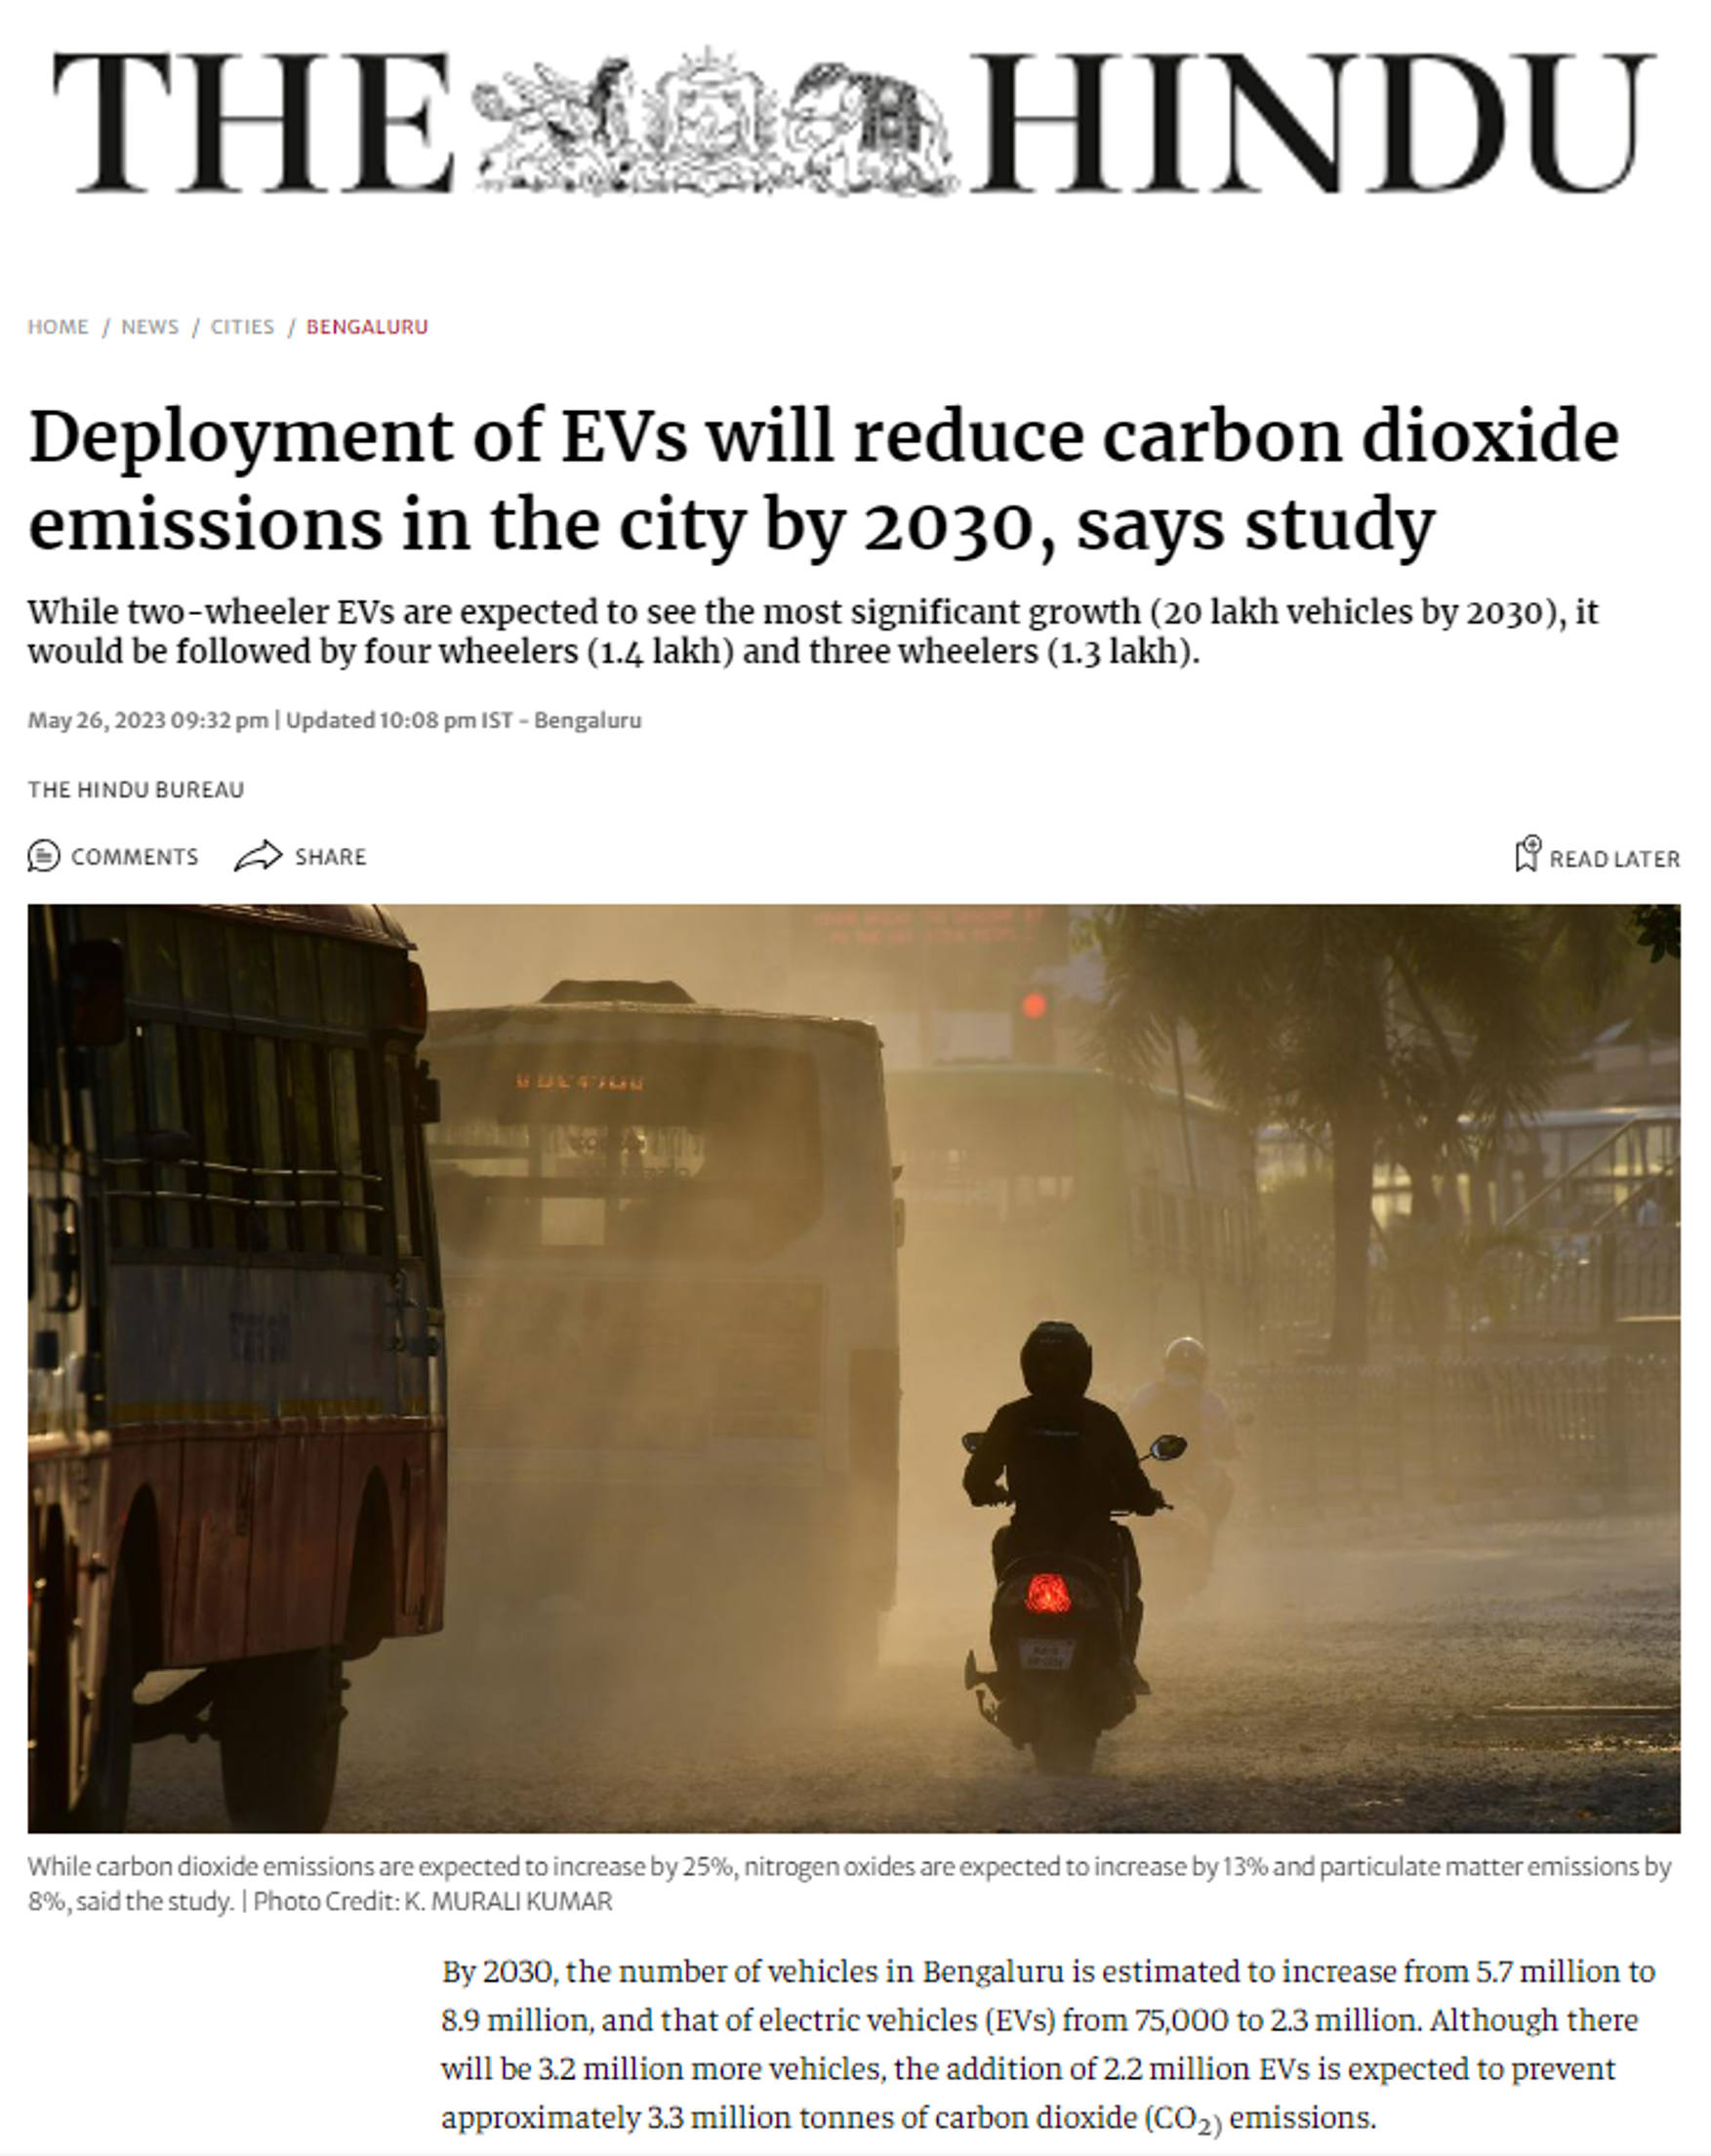 CSTEP’s study on the impact of electric vehicles on vehicular emissions covered by The Hindu